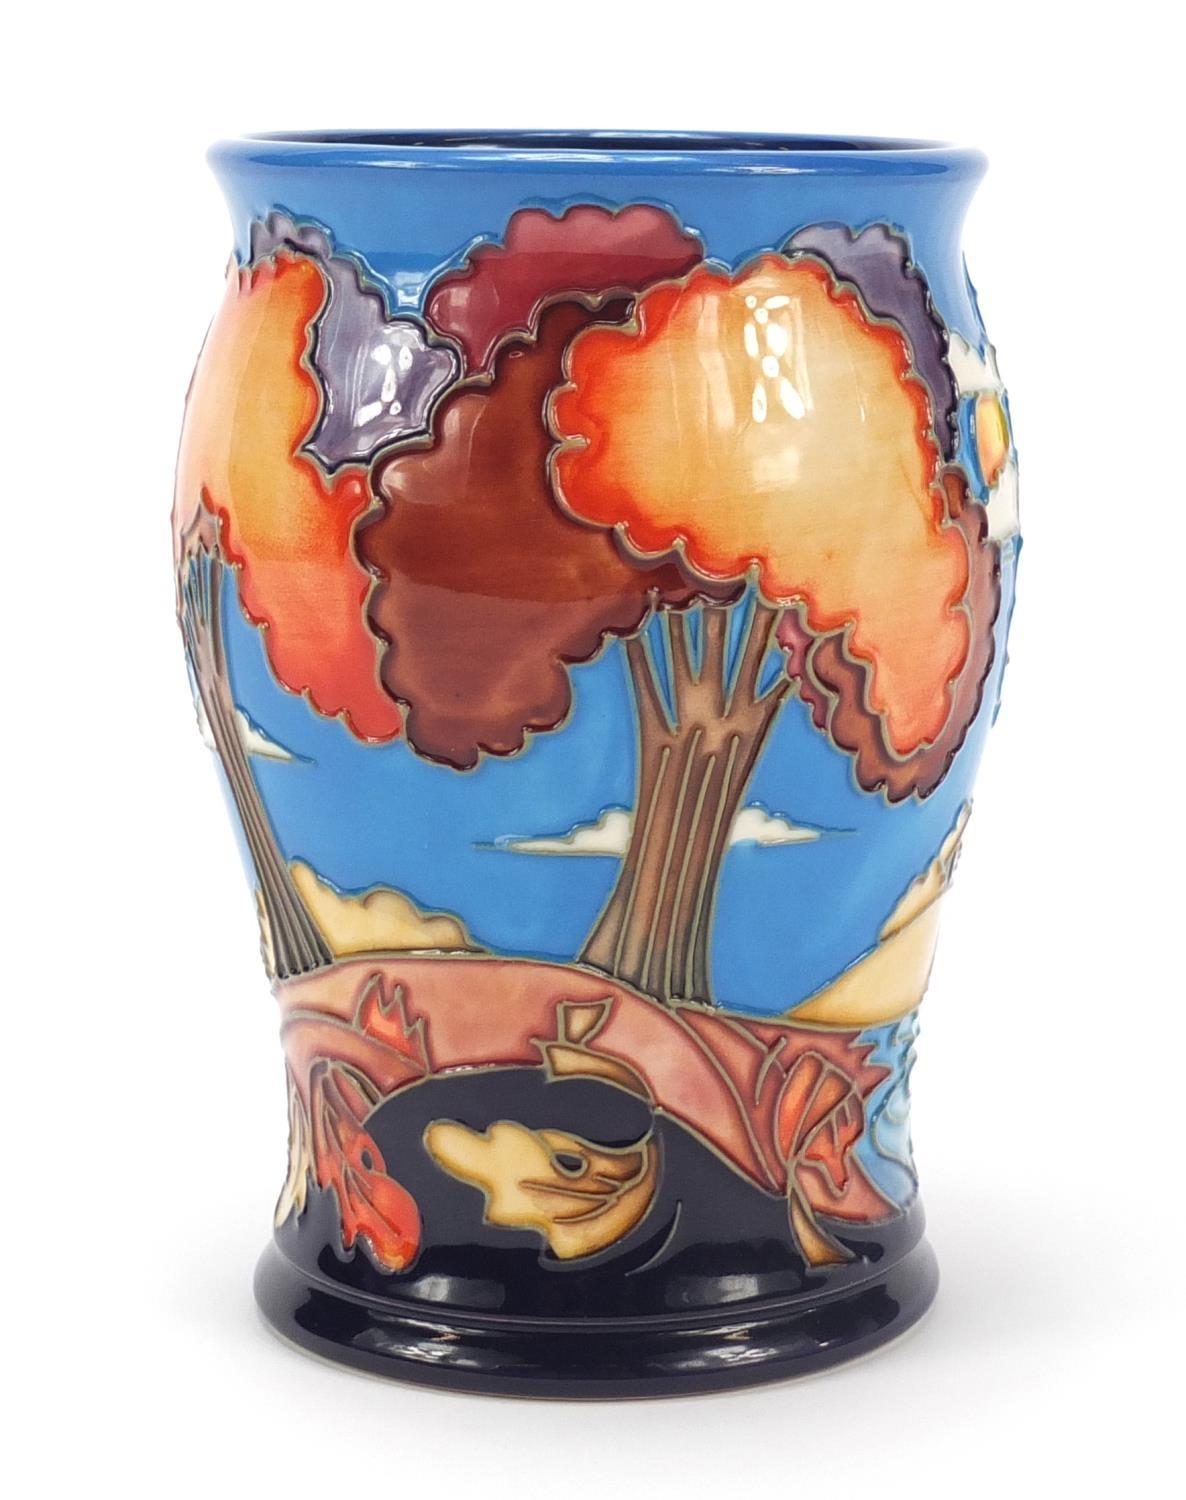 Emma Bossons for Moorcroft, pottery vase hand painted in the Wanderer's Sky pattern, dated 2002, - Image 5 of 9